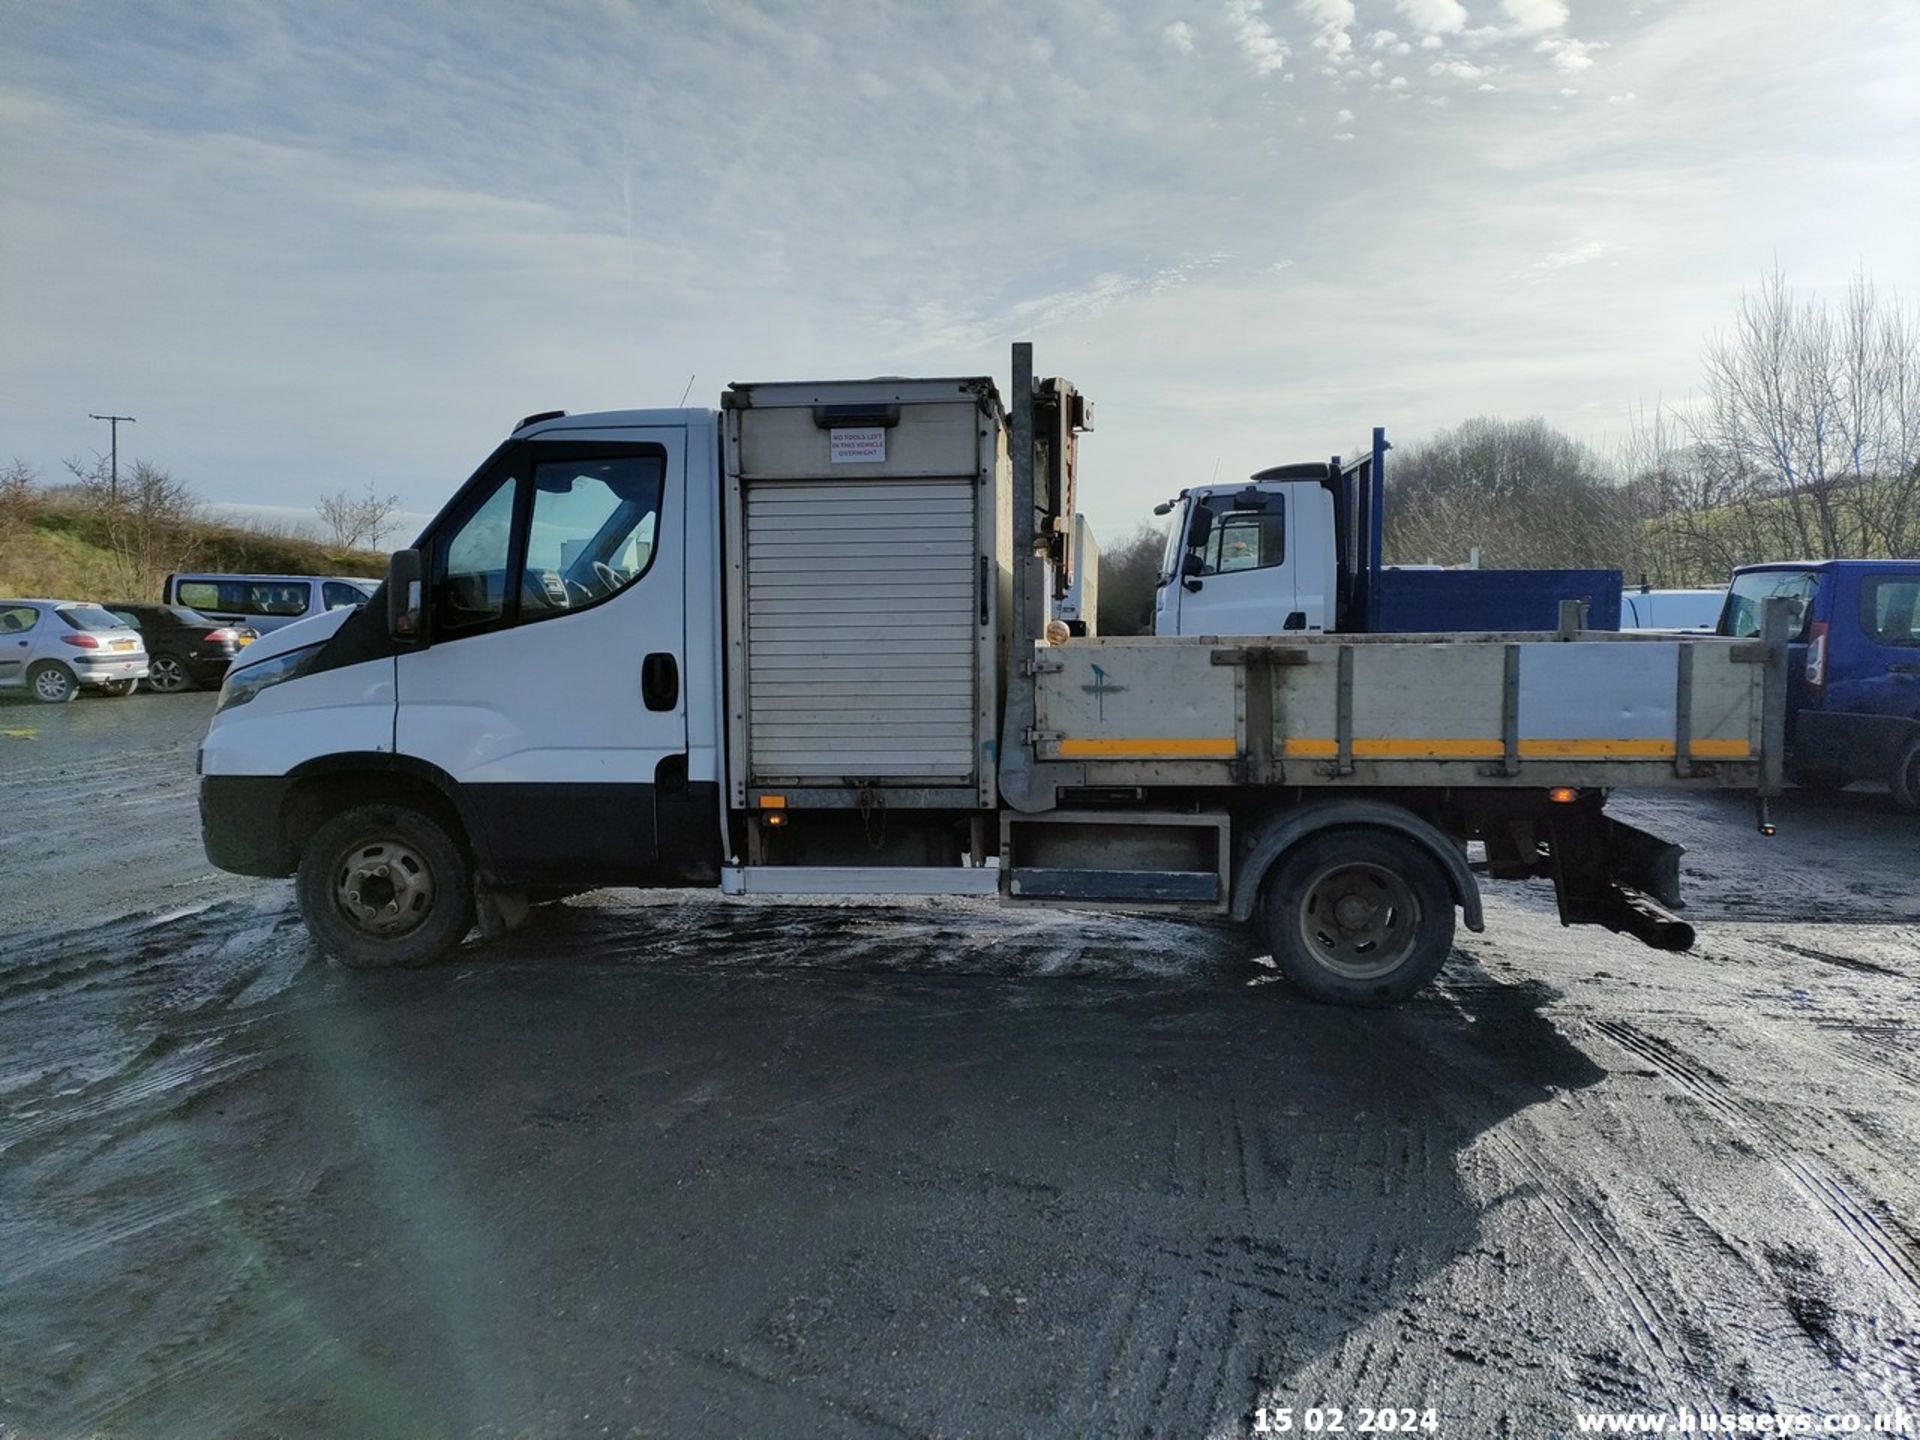 15/65 IVECO DAILY 35S11 MWB - 2998cc 2dr Tipper (White) - Image 17 of 38